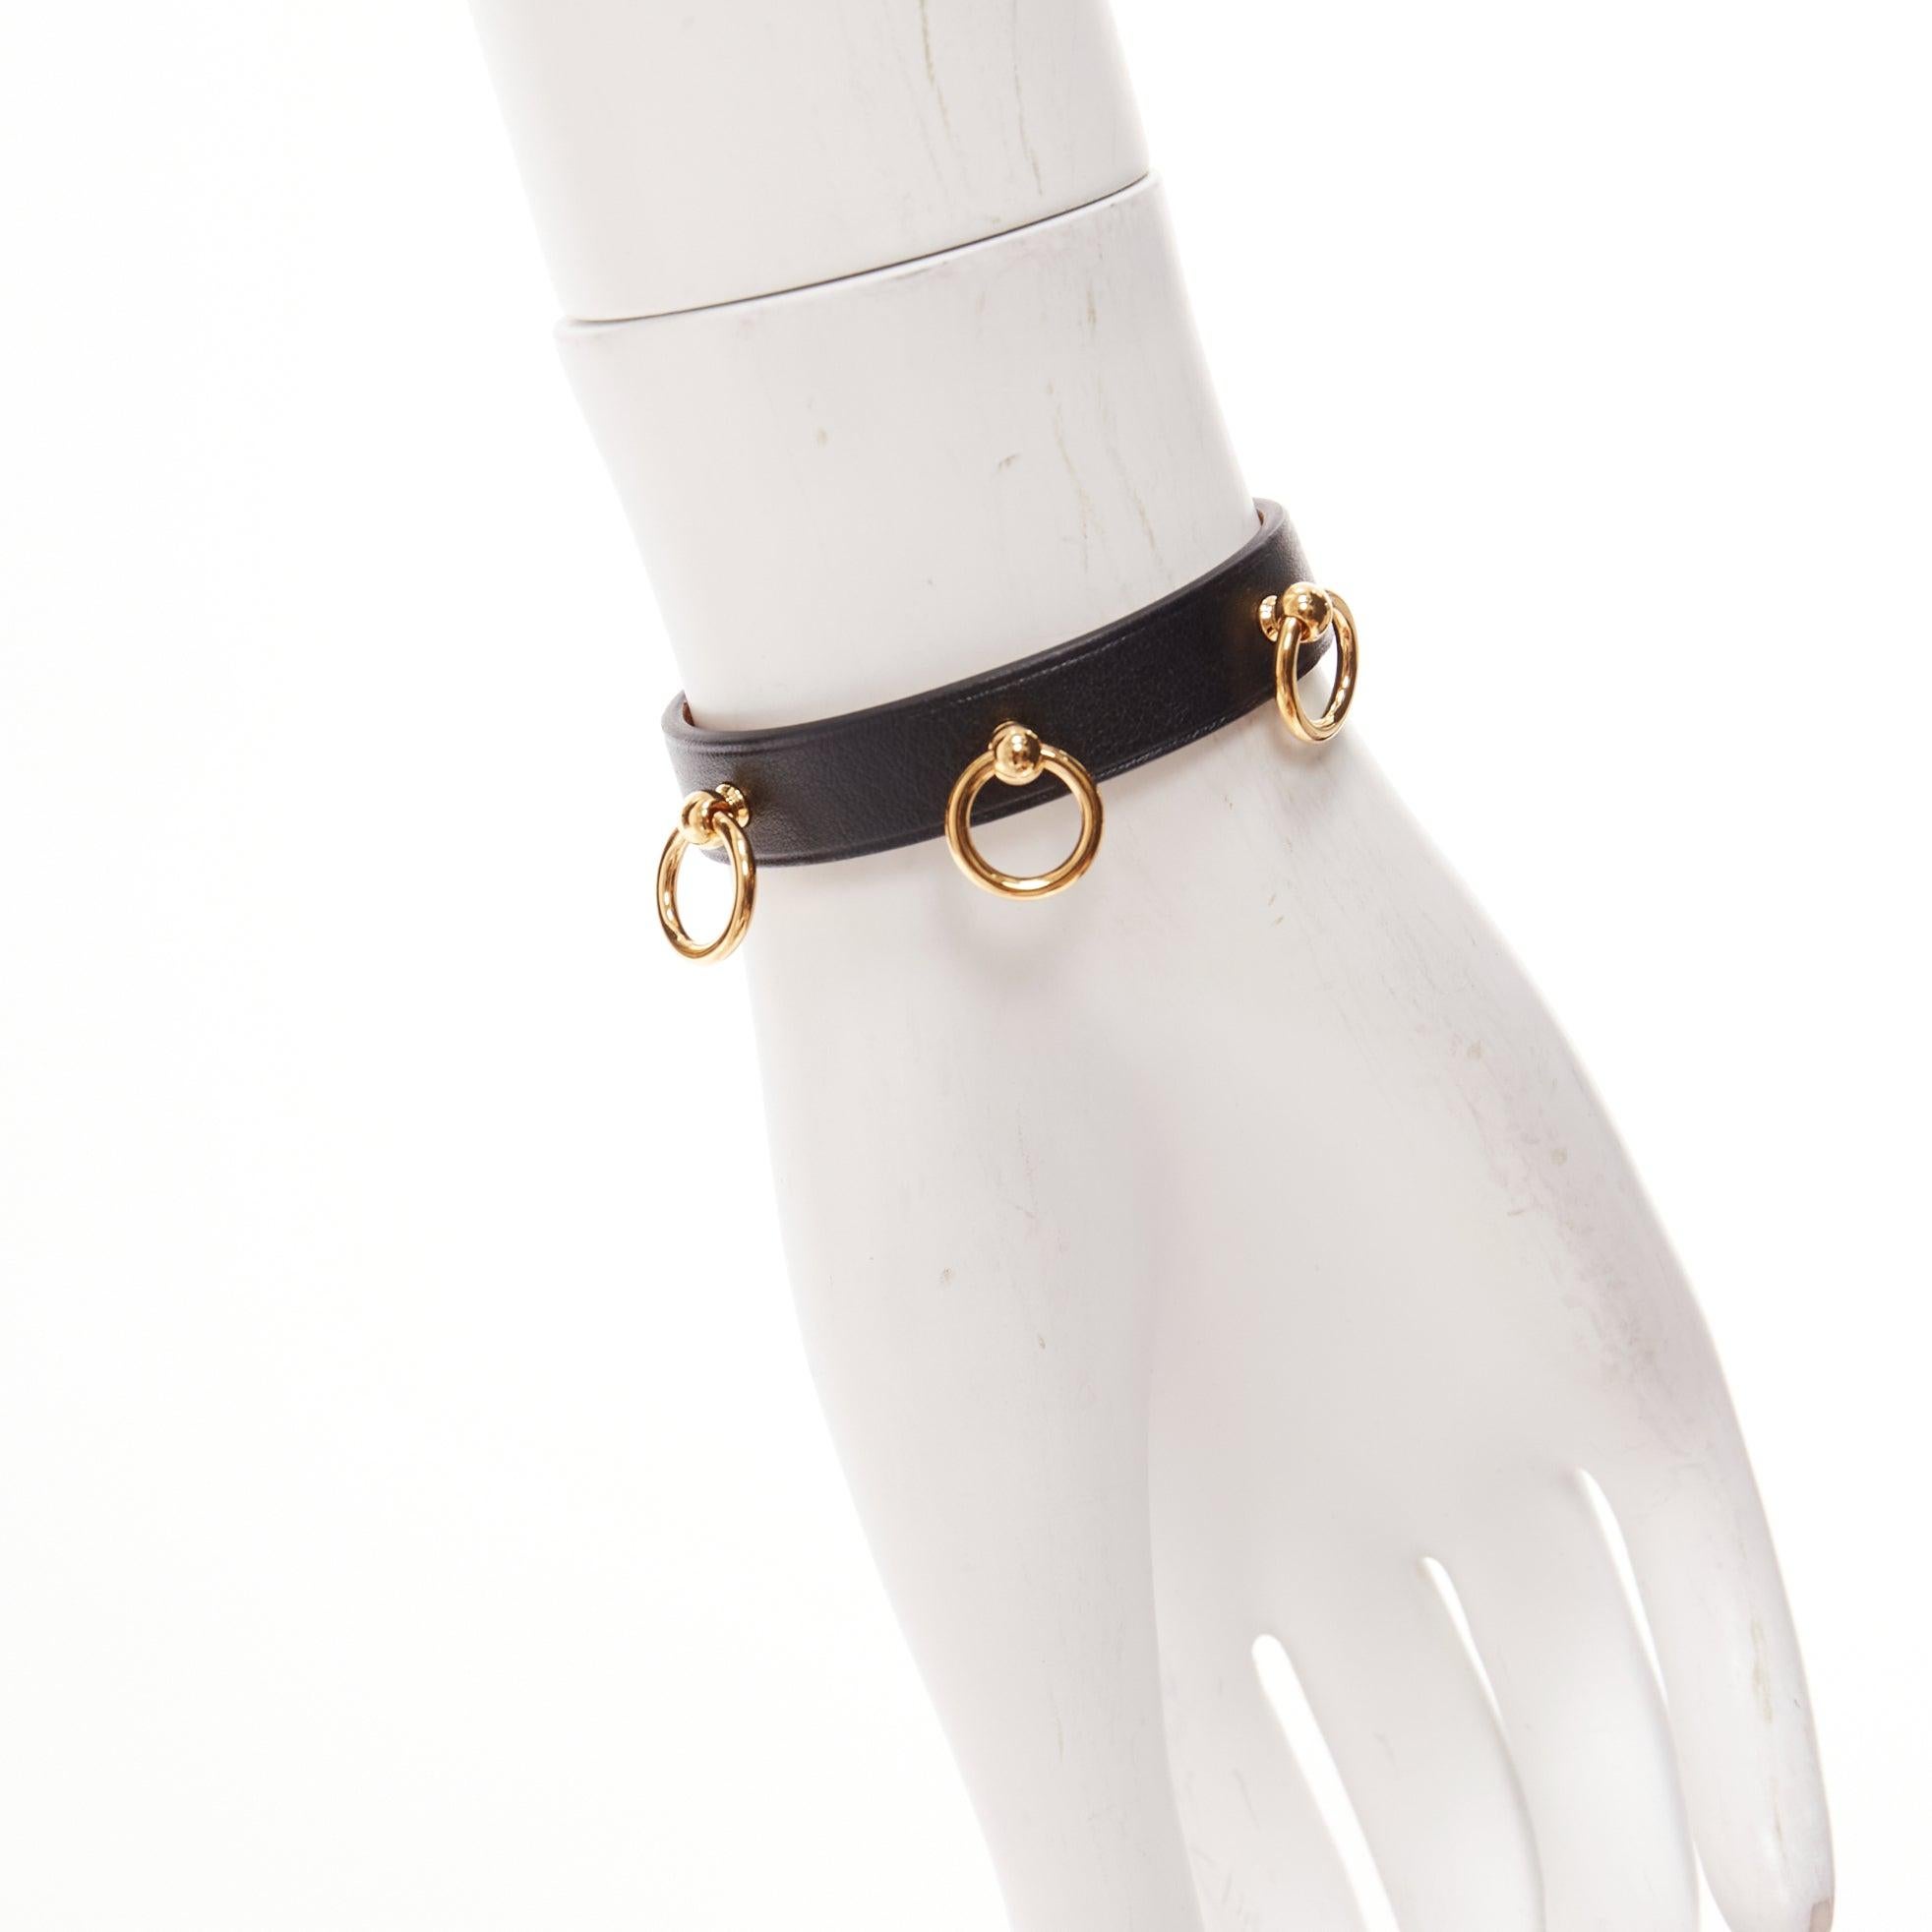 HERMES Mini Dog Anneaux gold ring black smooth leather lockette bracelet
Reference: AAWC/A01009
Brand: Hermes
Model: Mini Dog Anneaux
Material: Leather, Metal
Color: Black, Gold
Pattern: Solid
Closure: Belt
Lining: Nude Leather
Extra Details: Gold 3